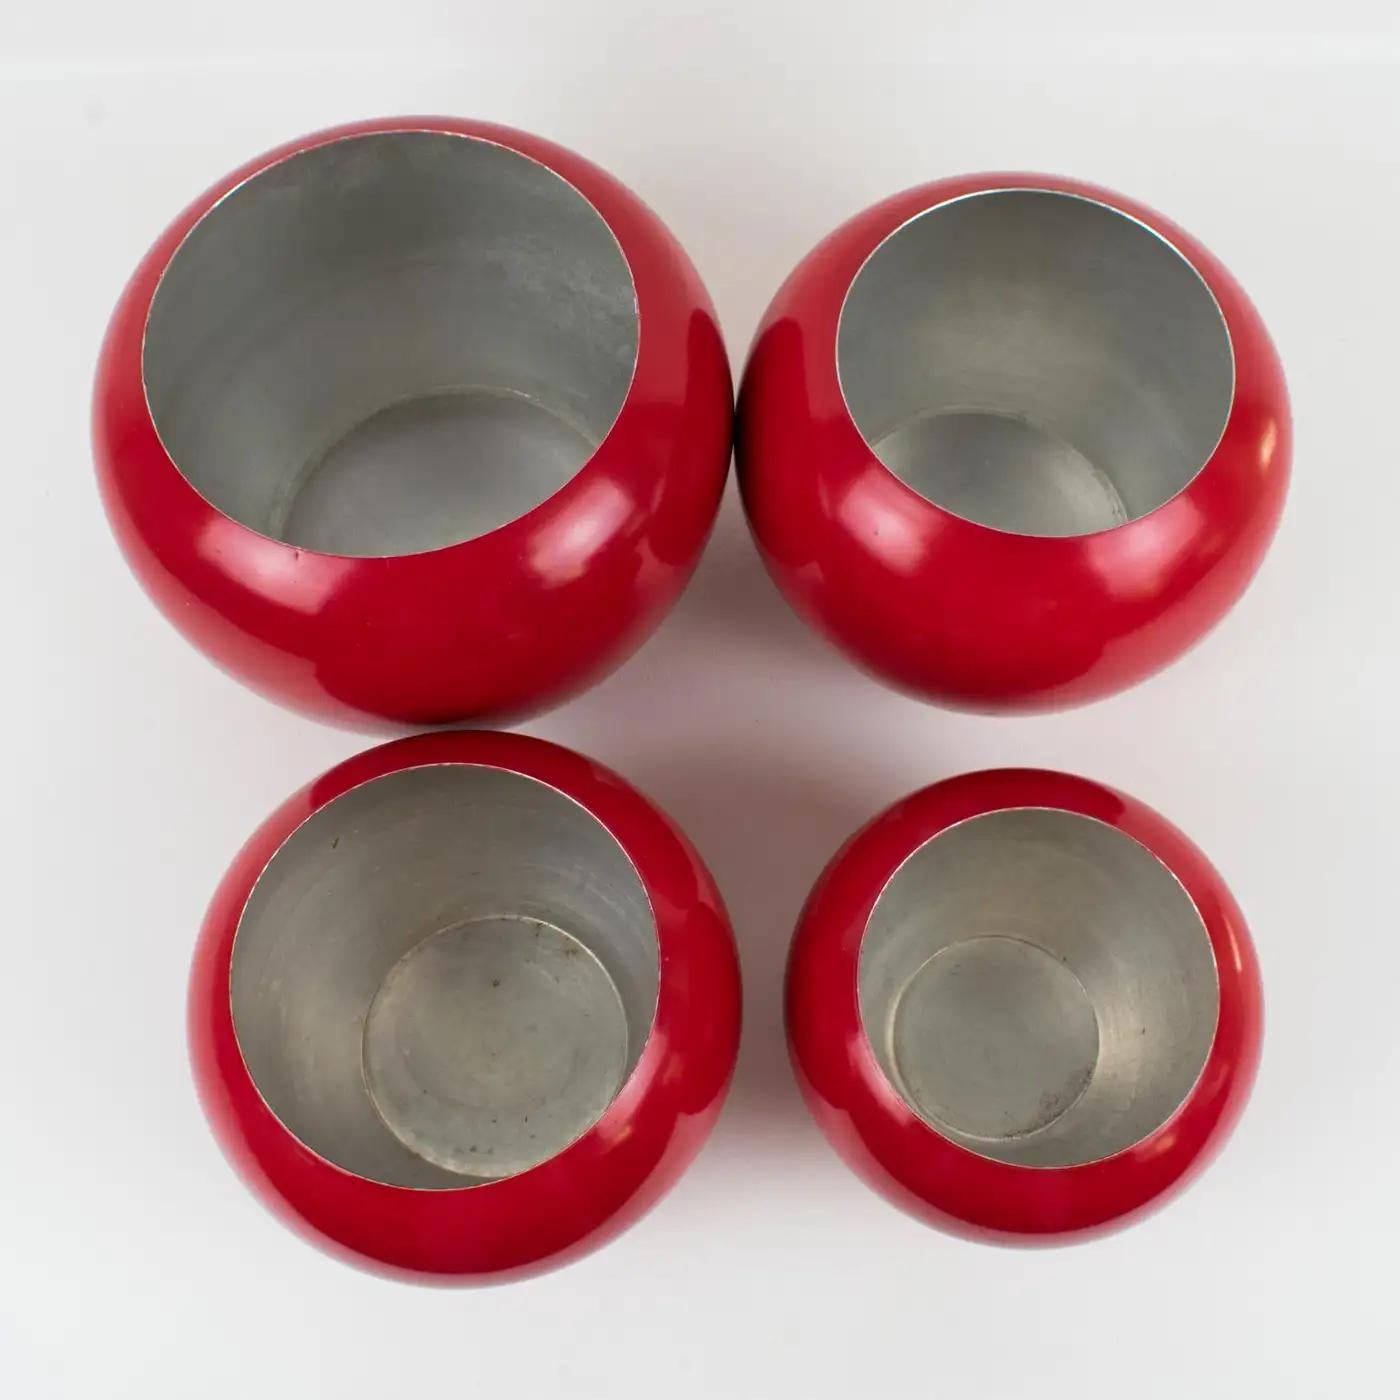 American Mid-Century Kitchen Canisters Cookie Jar Red Enamel Aluminum Apple, Set of 4 Pc For Sale